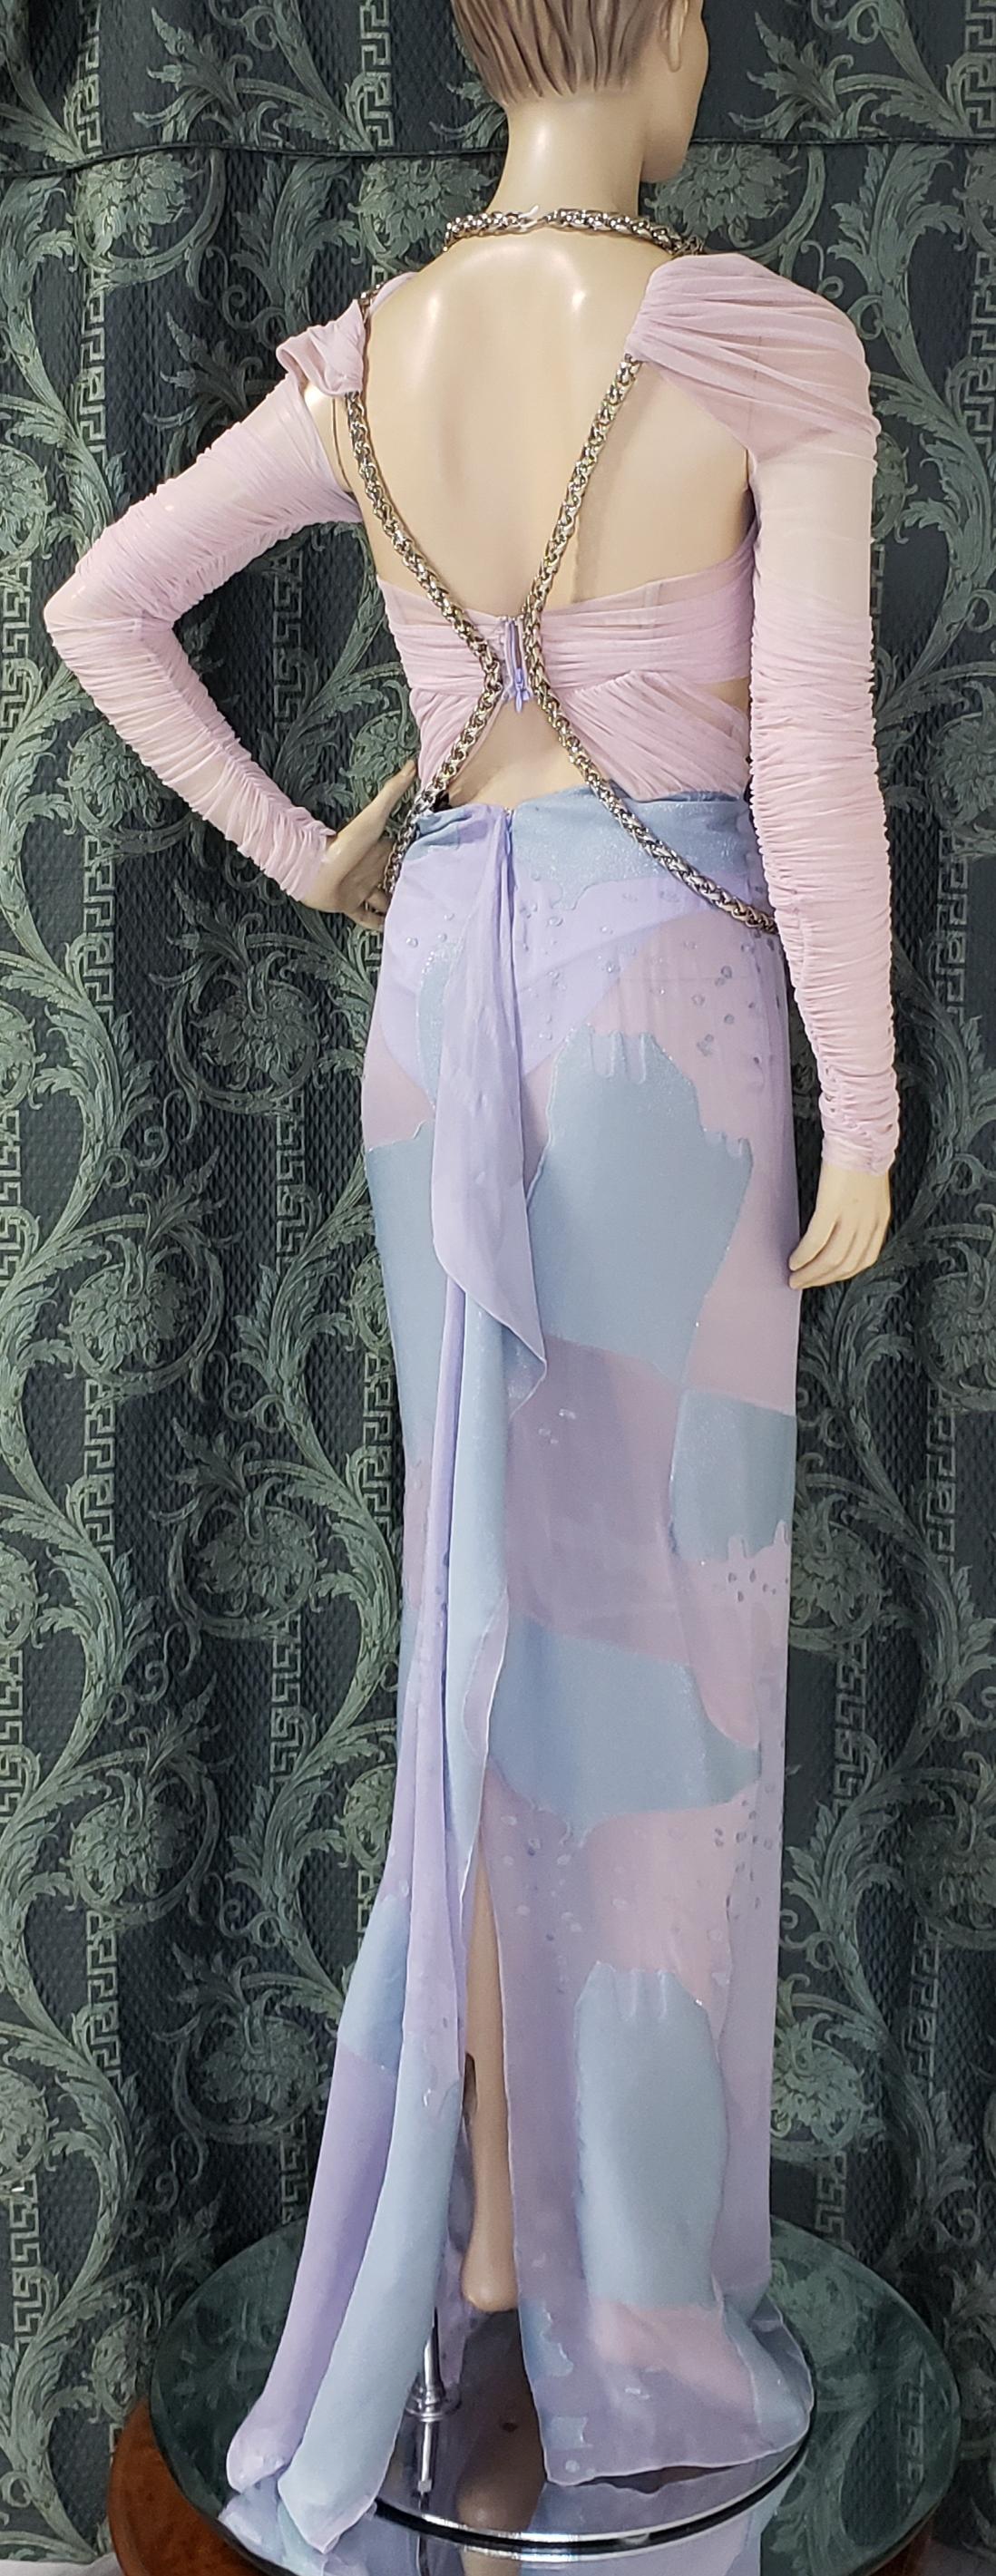 Gray S/S 2014 look # 44 NEW VERSACE CHIFFON LILAC LONG DRESS GOWN 